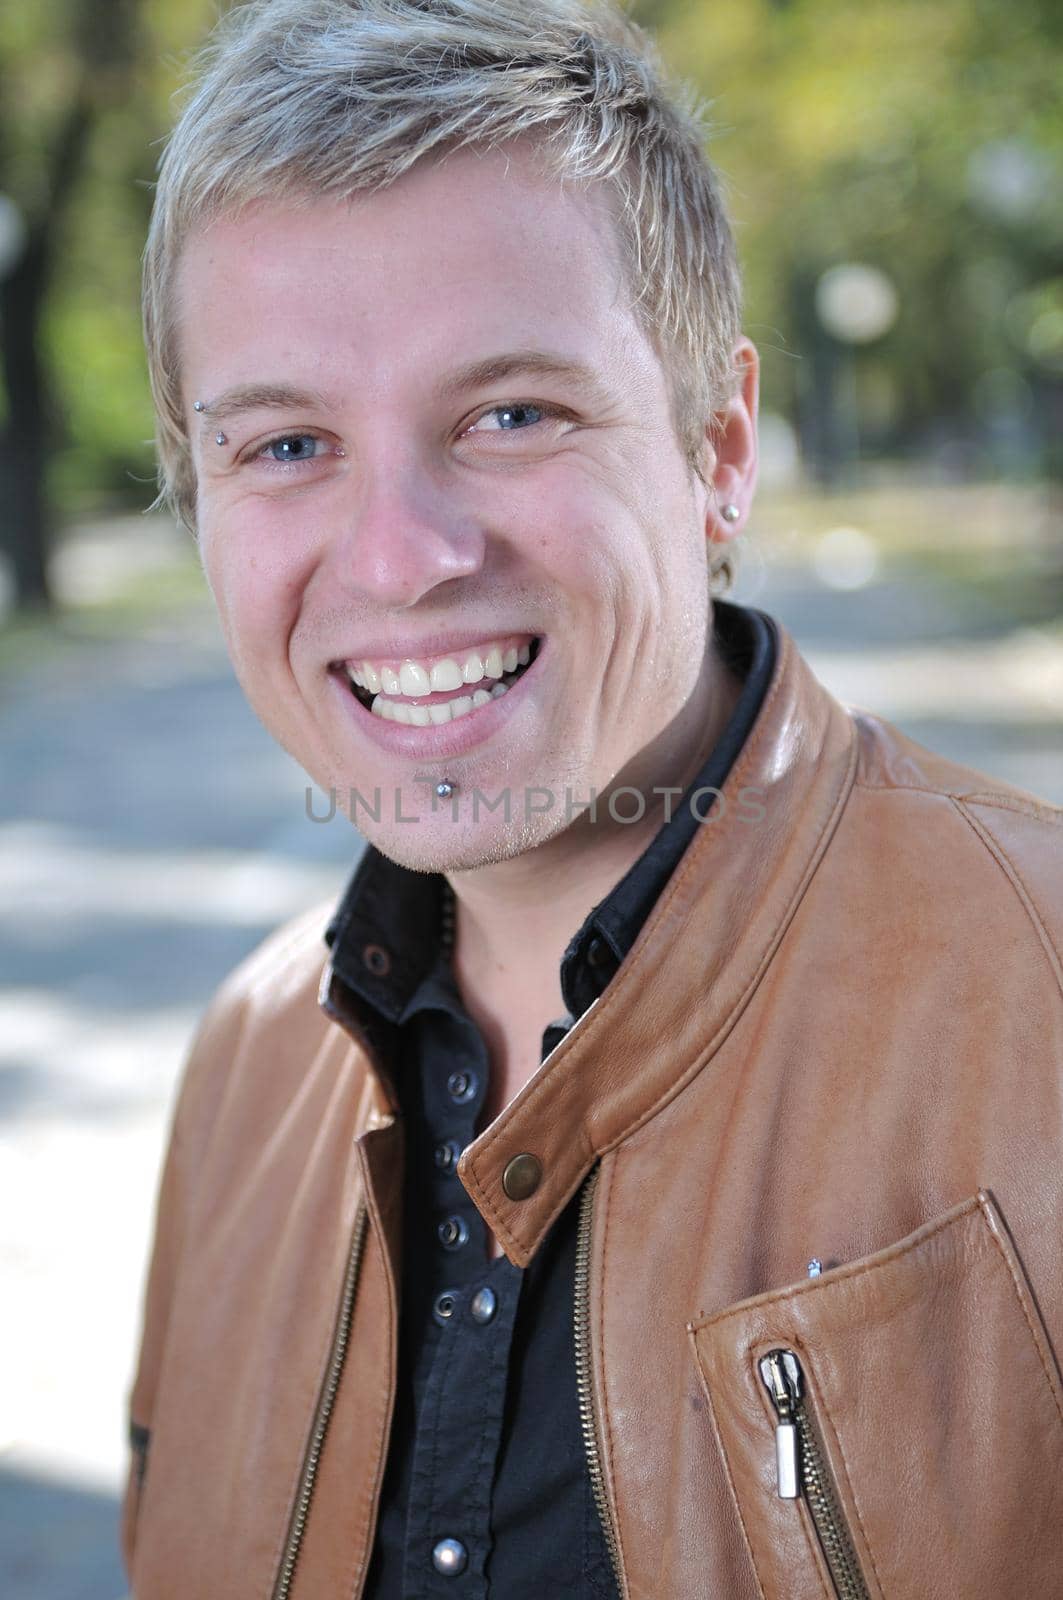 Handsome young man smiling outdoors by dotshock